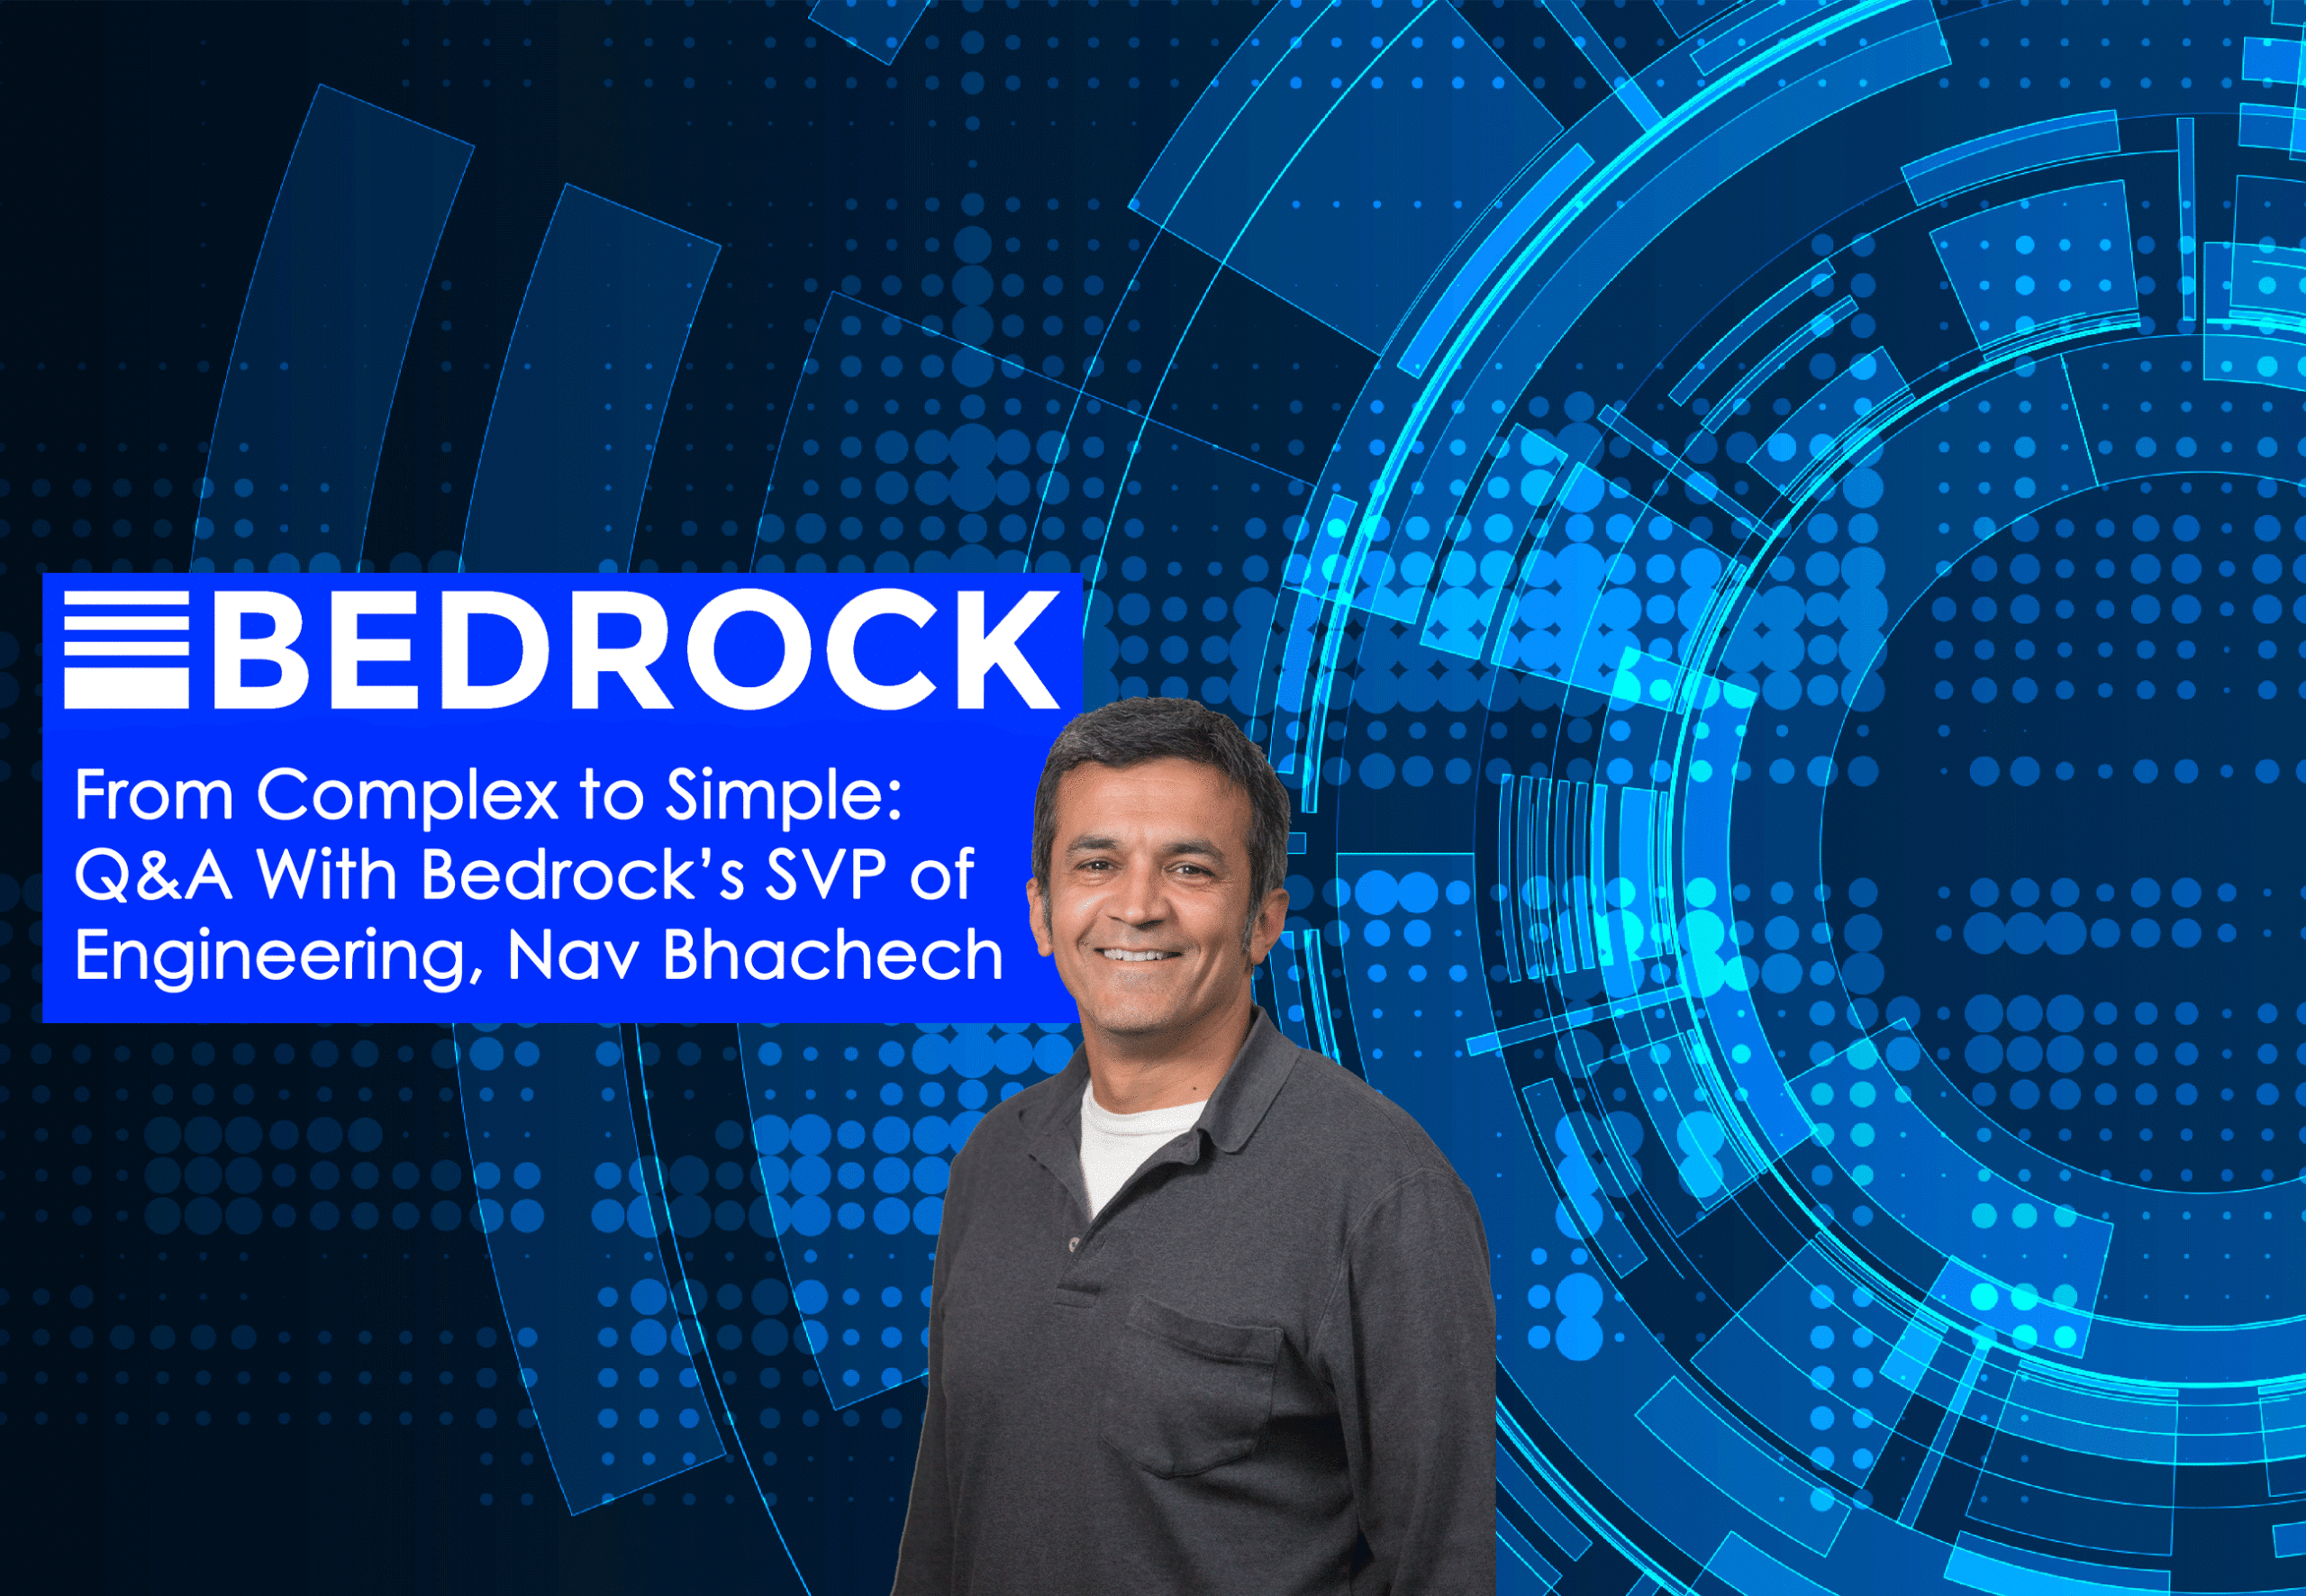 Bedrock Analytics’ SVP of Engineering Navdip Bhachech explains how to render syndicated data in ways even non-analysts can understand.